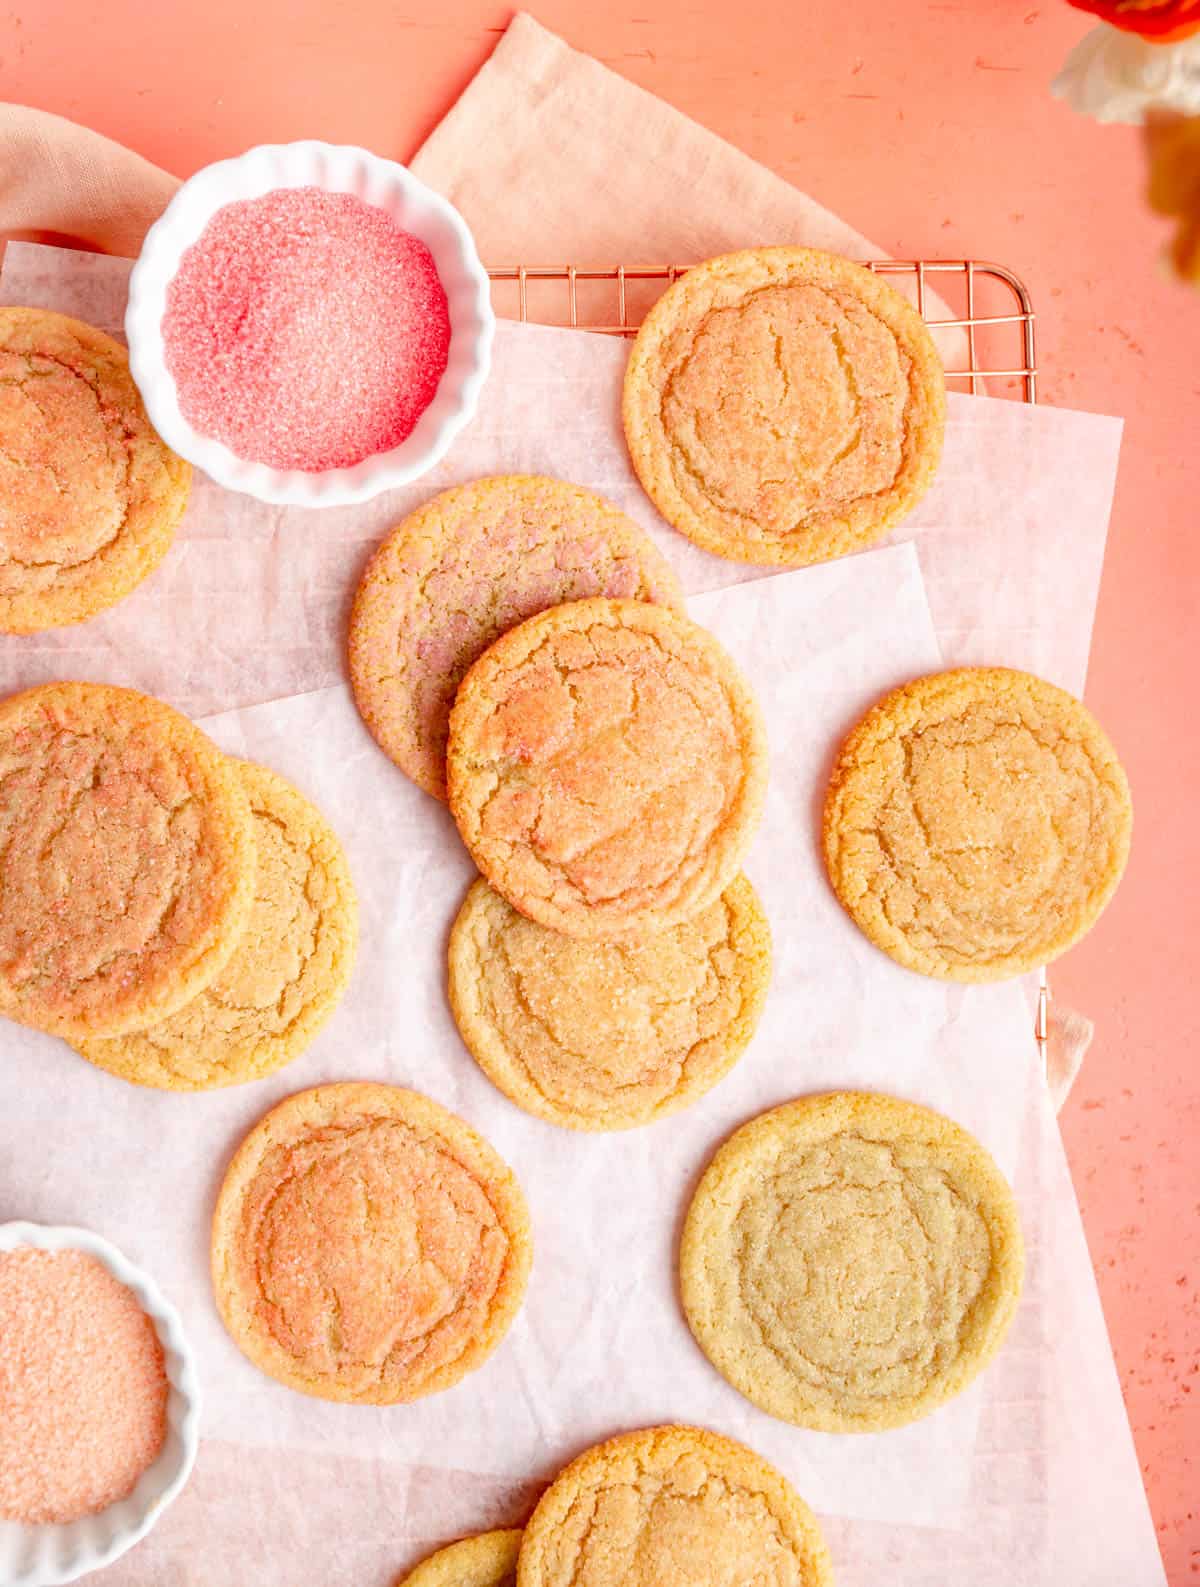 multi colored sugar cookies on parchment paper on coral background with bowls of colored sugar.